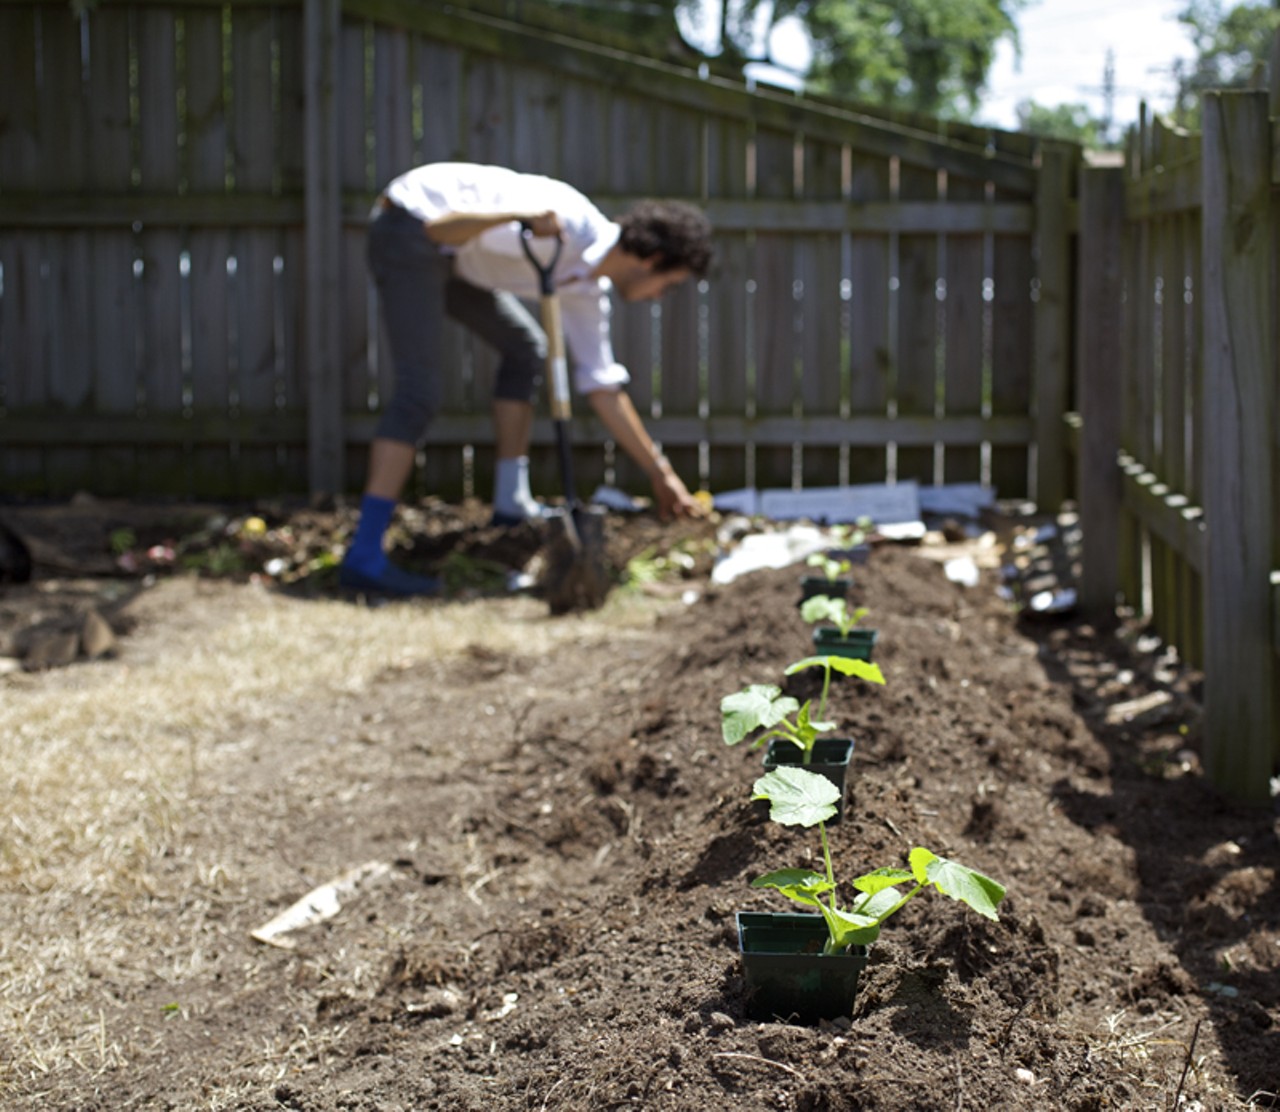 Recent Washington University architectural graduate, now dishwasher and on-site gardener, Antonio Pacheco hard at work in Farmhaus' garden behind the restaurant. The squash is about ready to be planted as Antonio works the compost from the restaurant scrap into the soil of the garden bed.